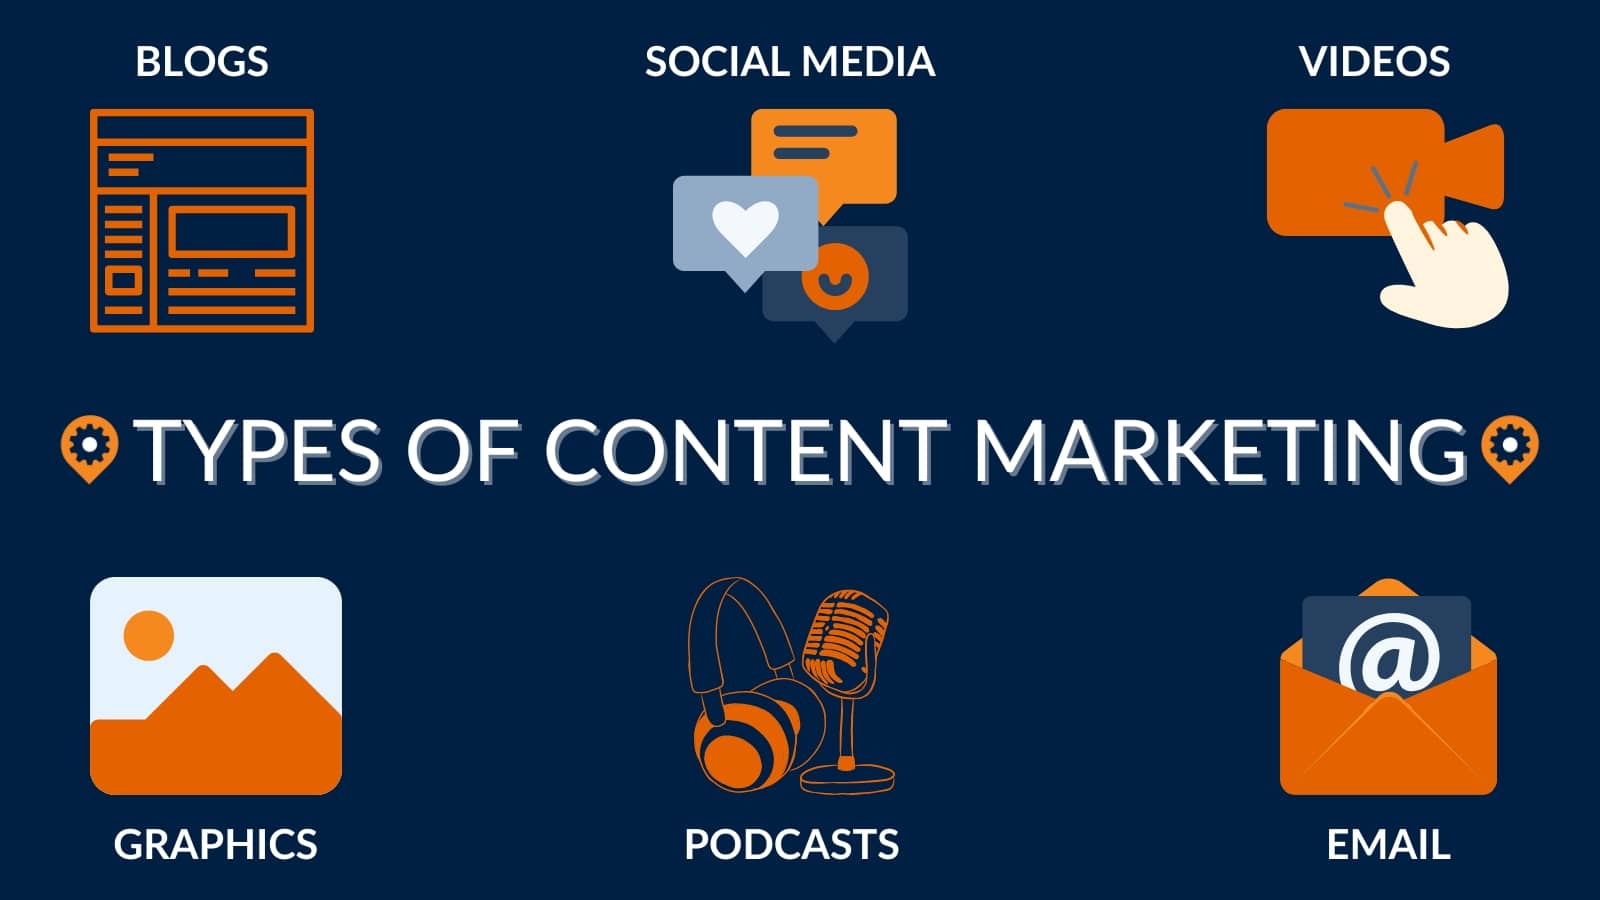 Types of content marketing channels include blogs, social media, videos, graphics, podcasts, email. 